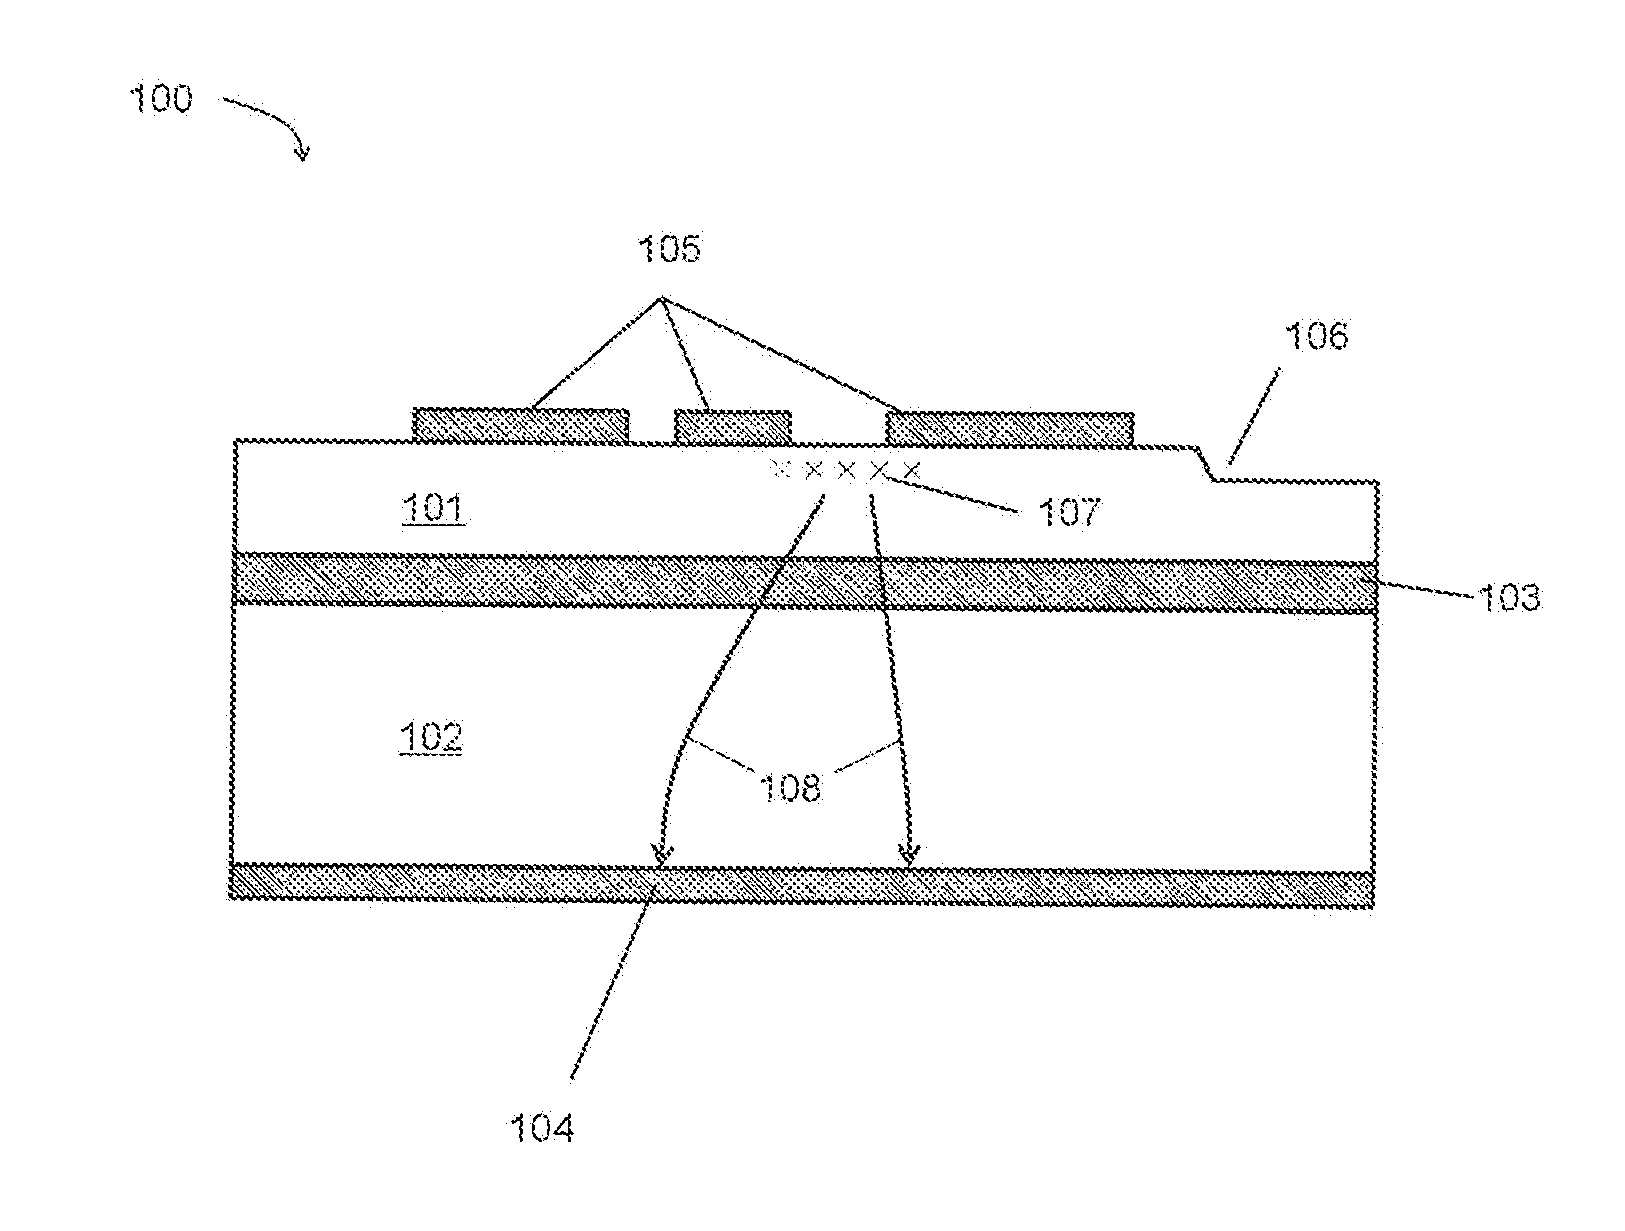 Semiconductor device structures comprising polycrystalline CVD diamond with improved near-substrate thermal conductivity